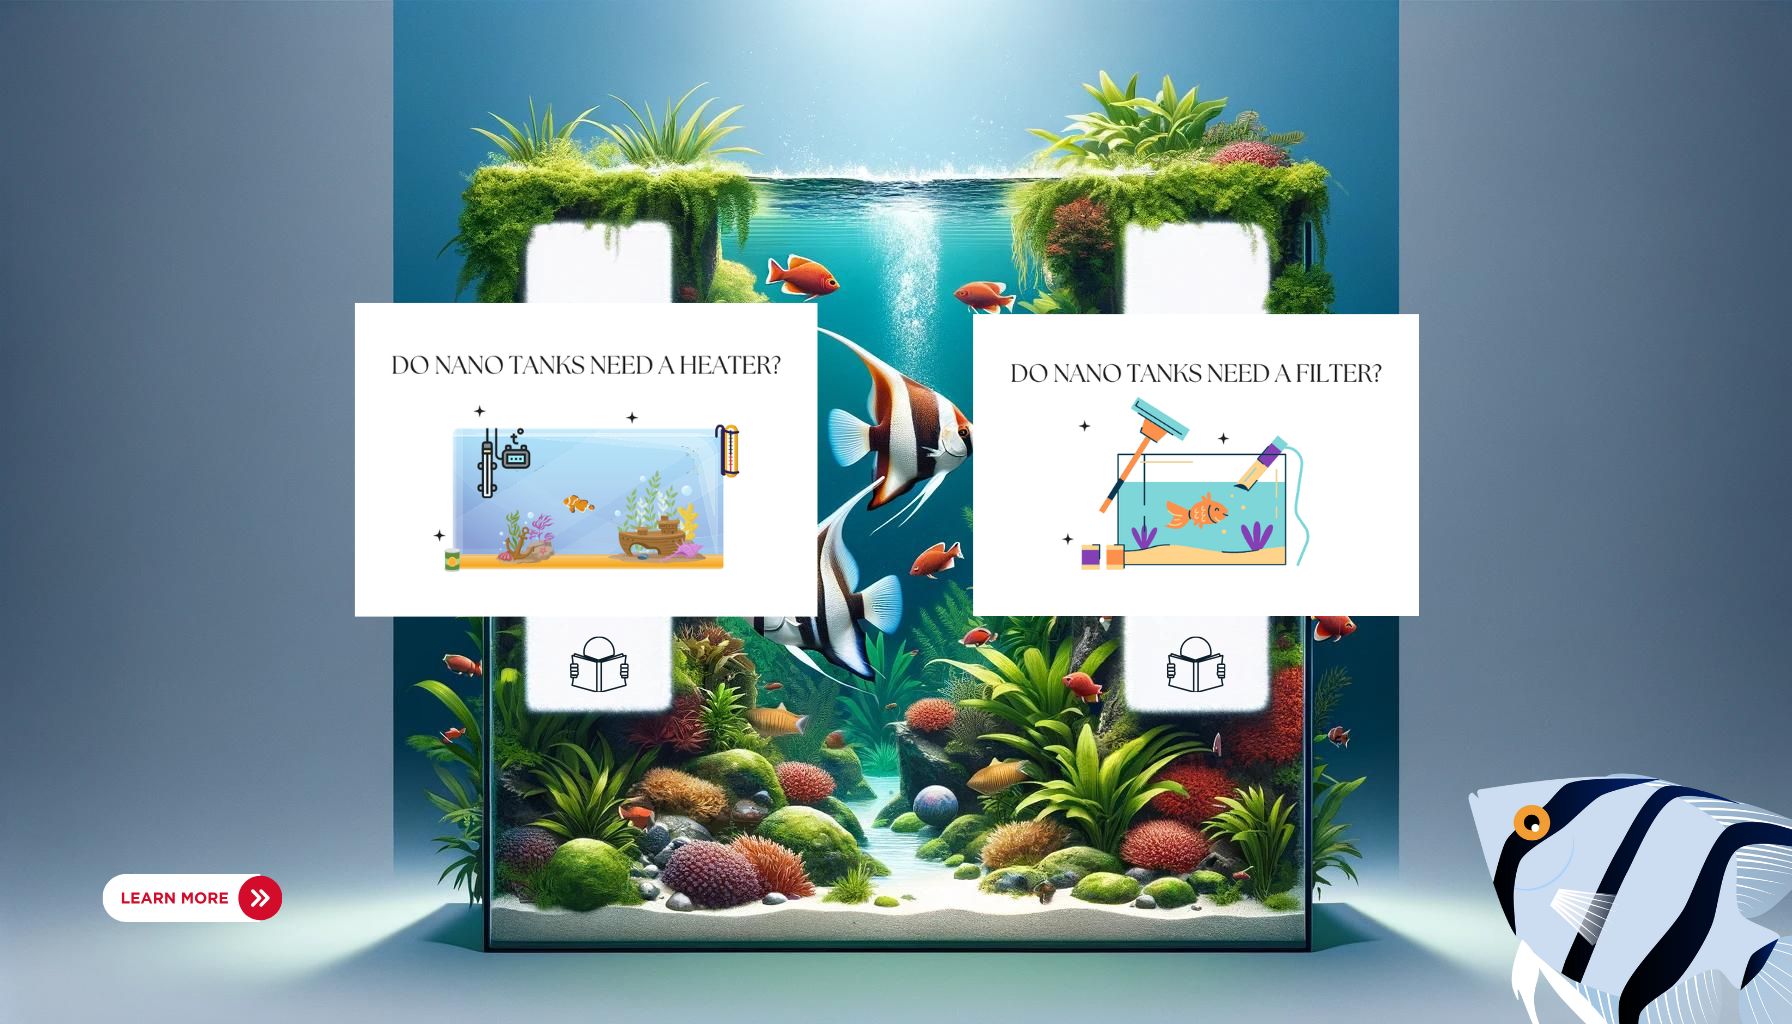 A creative visual of a nano fish tank divided into two sections with infographics, one asking if nano tanks need a heater and the other if they require a filter, both against a backdrop of a well-planted aquarium with angelfish, implying a guide on maintaining proper tank conditions for angelfish.